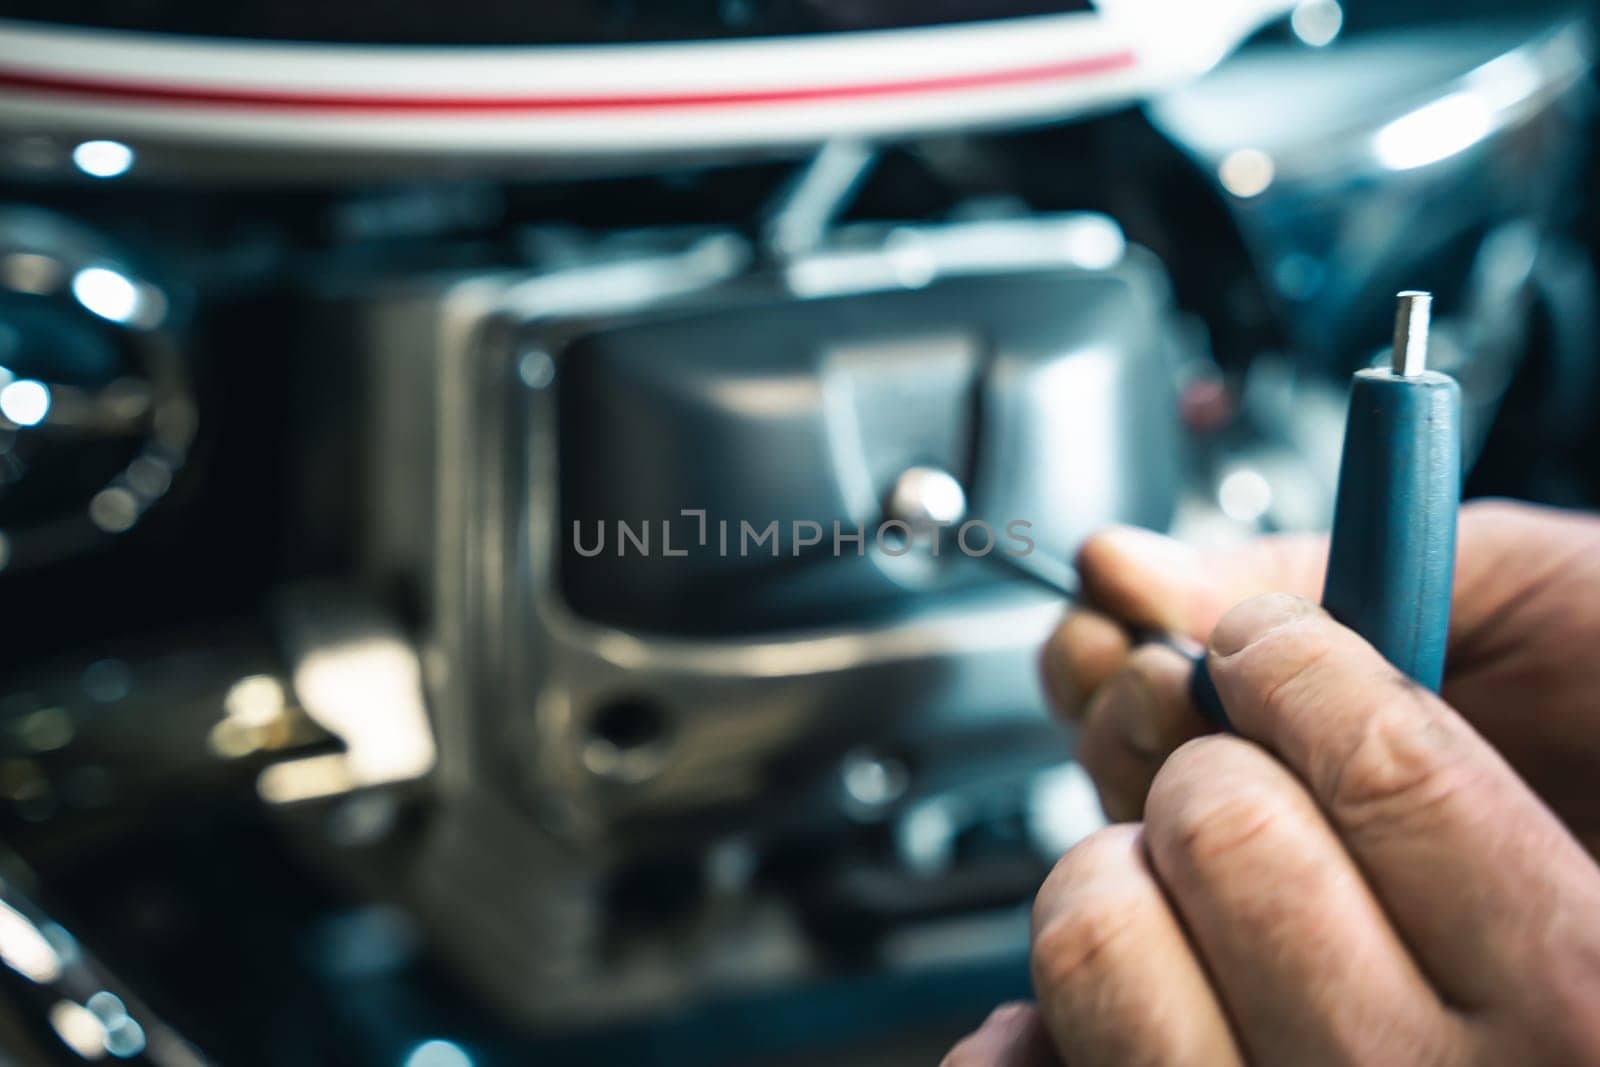 installing the valve cover on the motorcycle engine. The mechanic installs and screws the valve cover. maintenance of motor vehicles. motorcycle repair and maintenance concept.defocus, blur